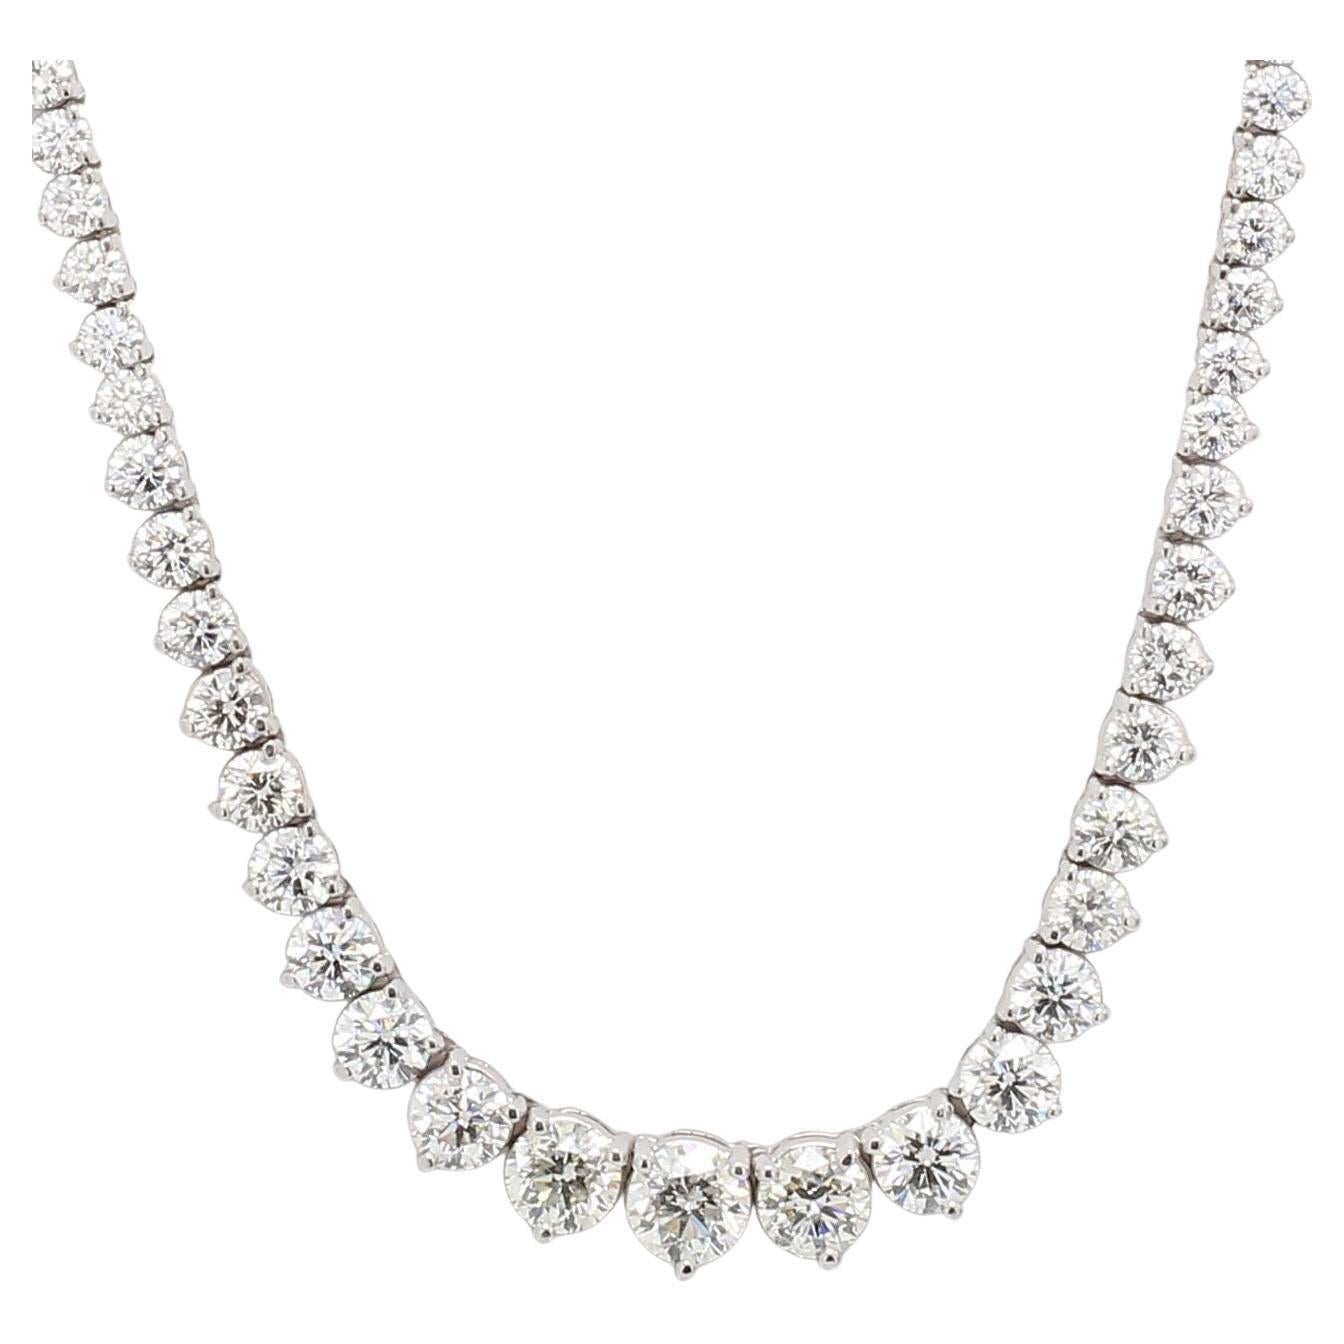 An exquisite riviera necklace of 25 carats
top quality set in 18 carats whtie gold
F/G color
VS clarity